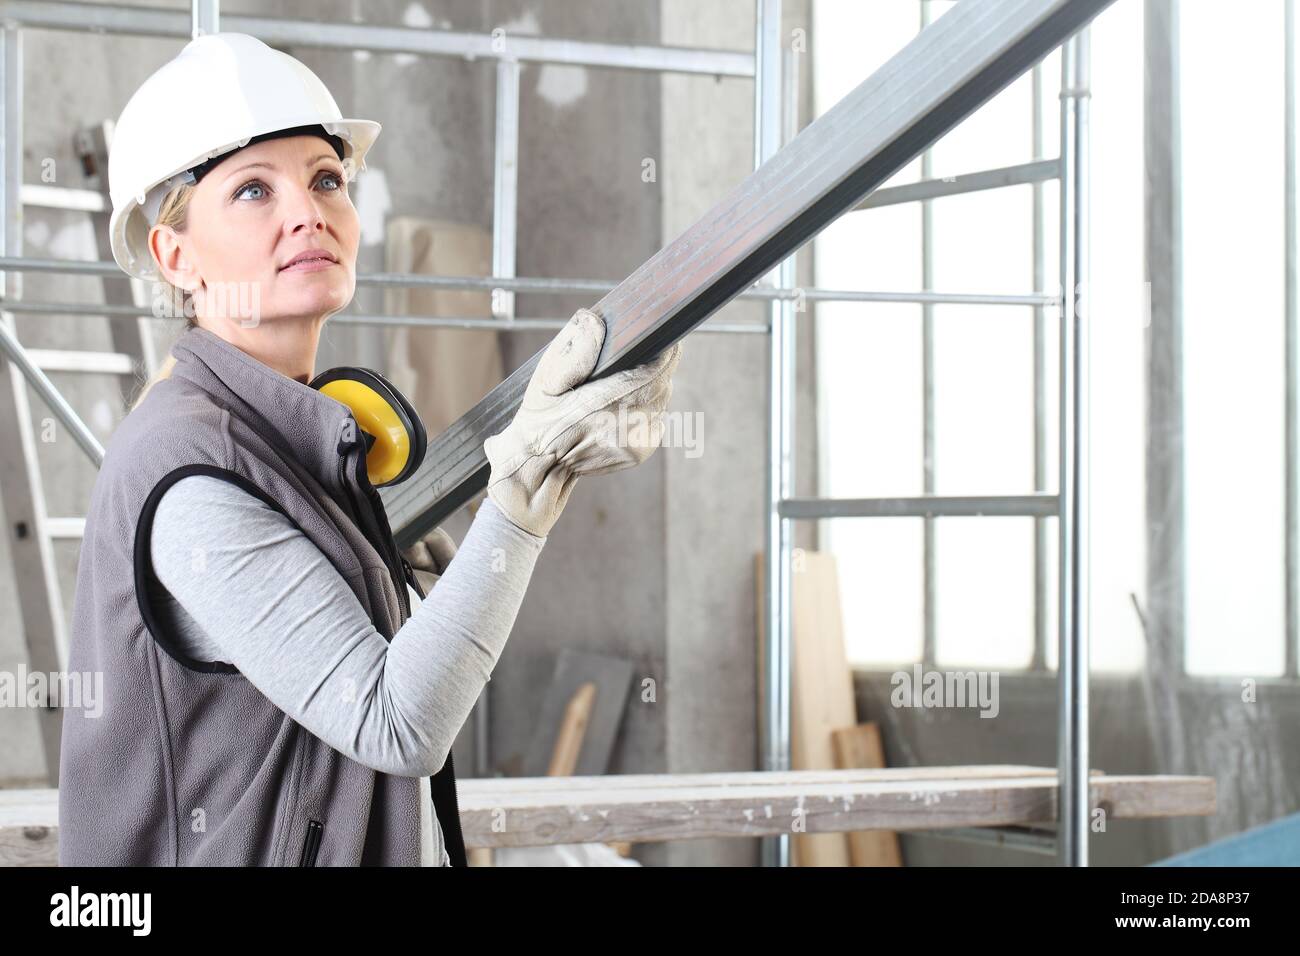 woman construction worker builder portrait wearing white helmet and hearing protection headphones, holding a metal stud for drywall on interior site b Stock Photo